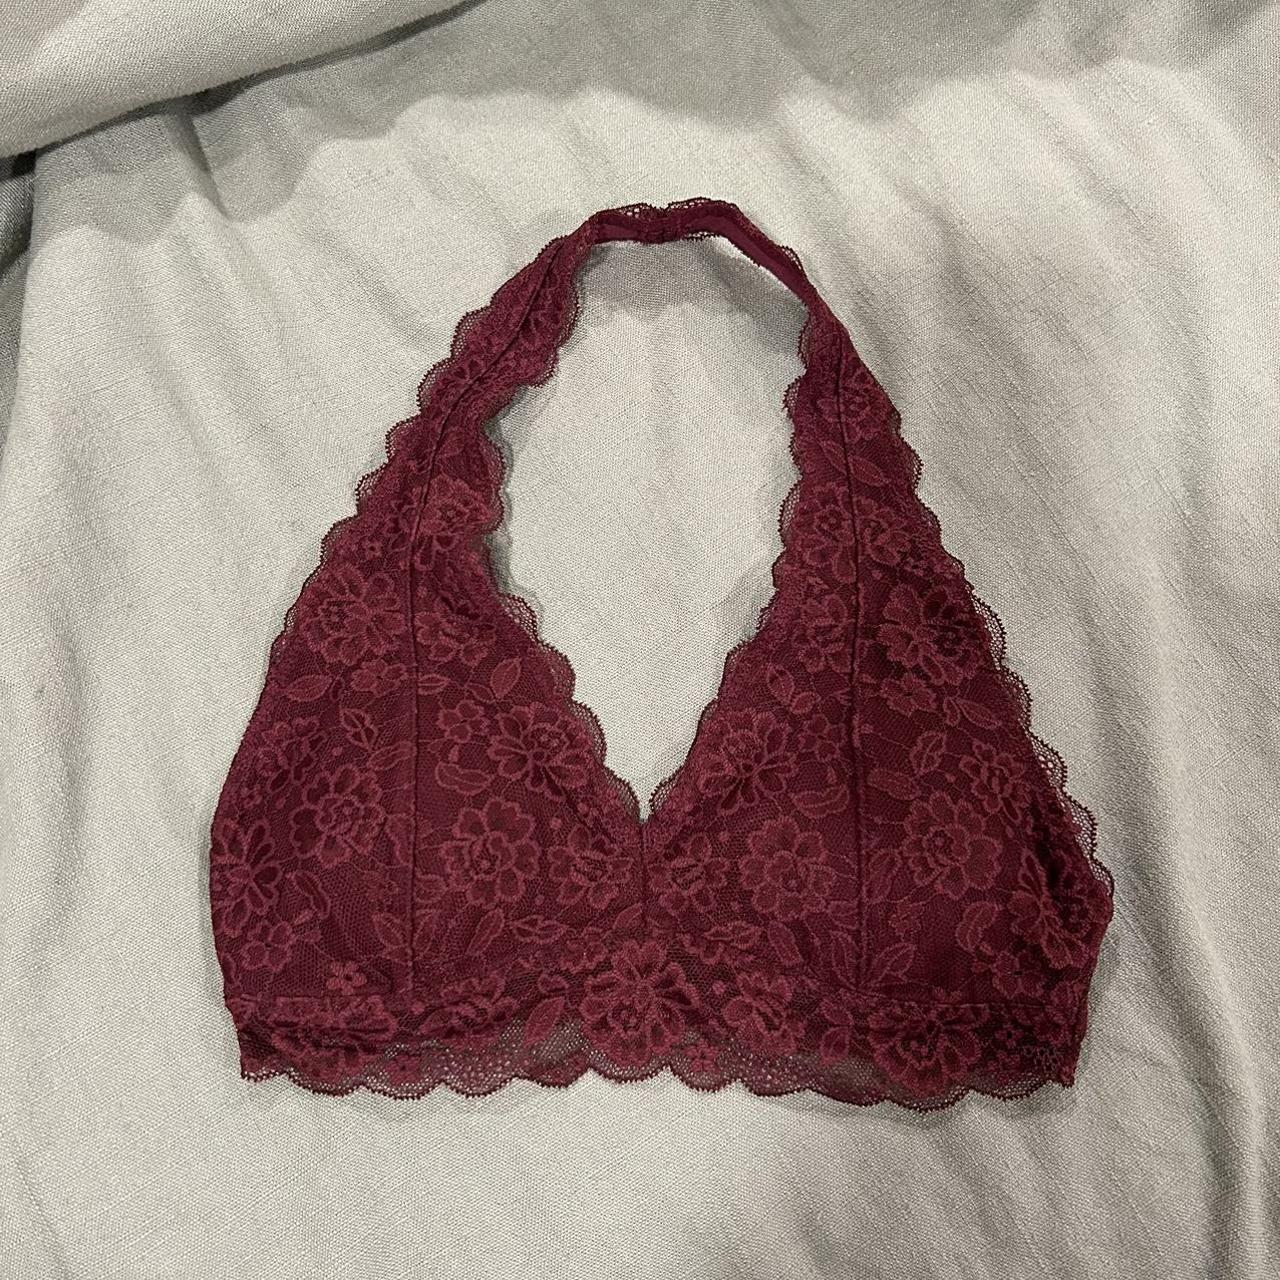 Hollister Gilly Hicks Red Chenille Lace Longline Bralette